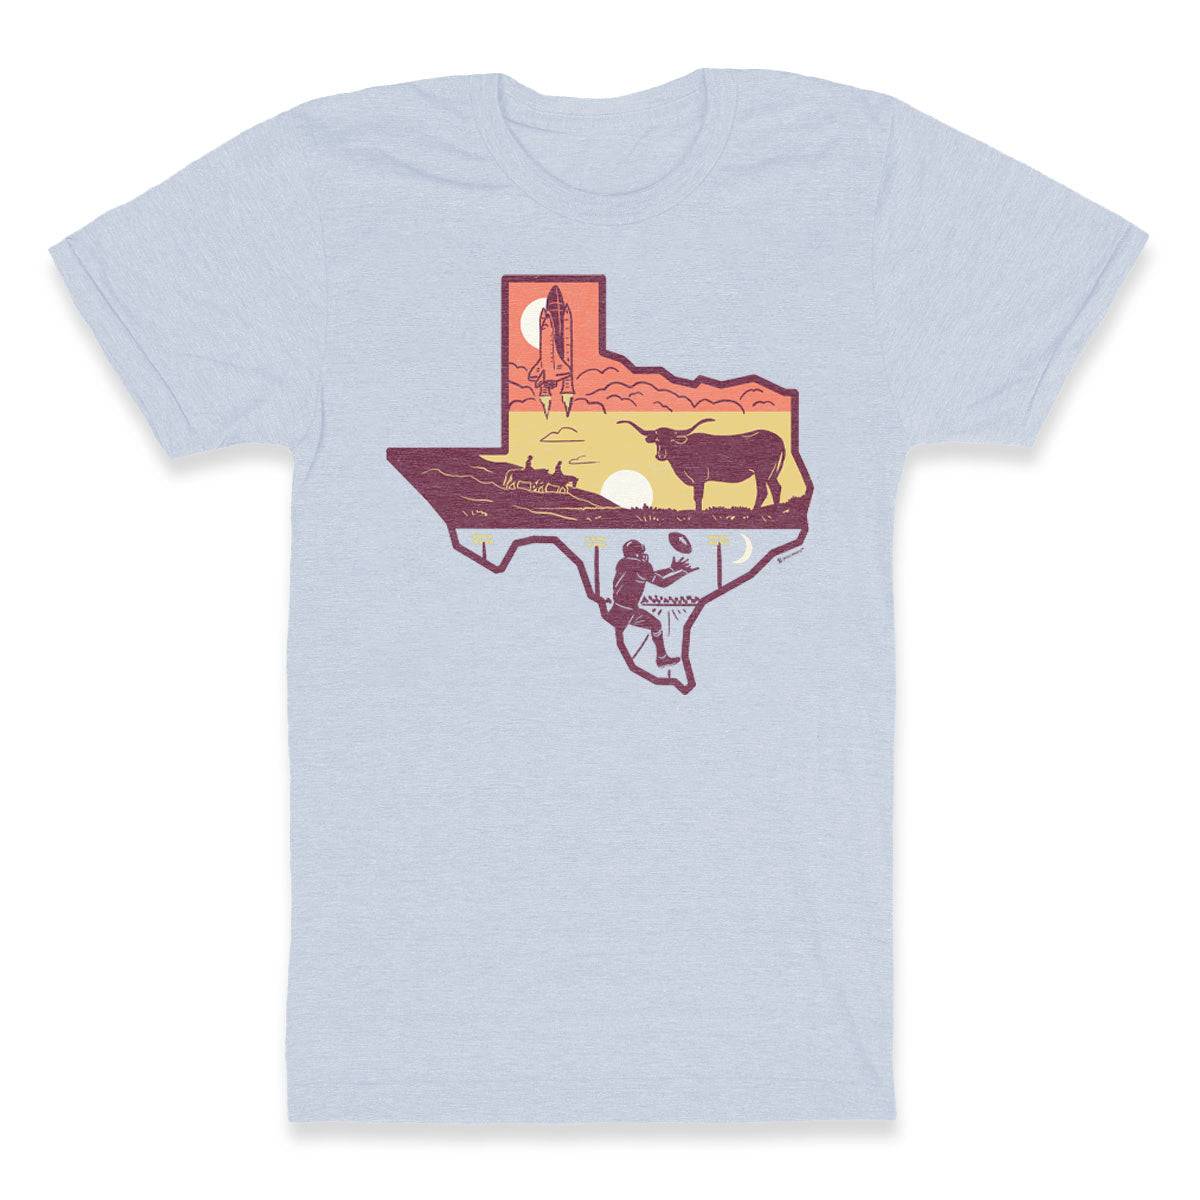 Layers of Texas T-Shirt